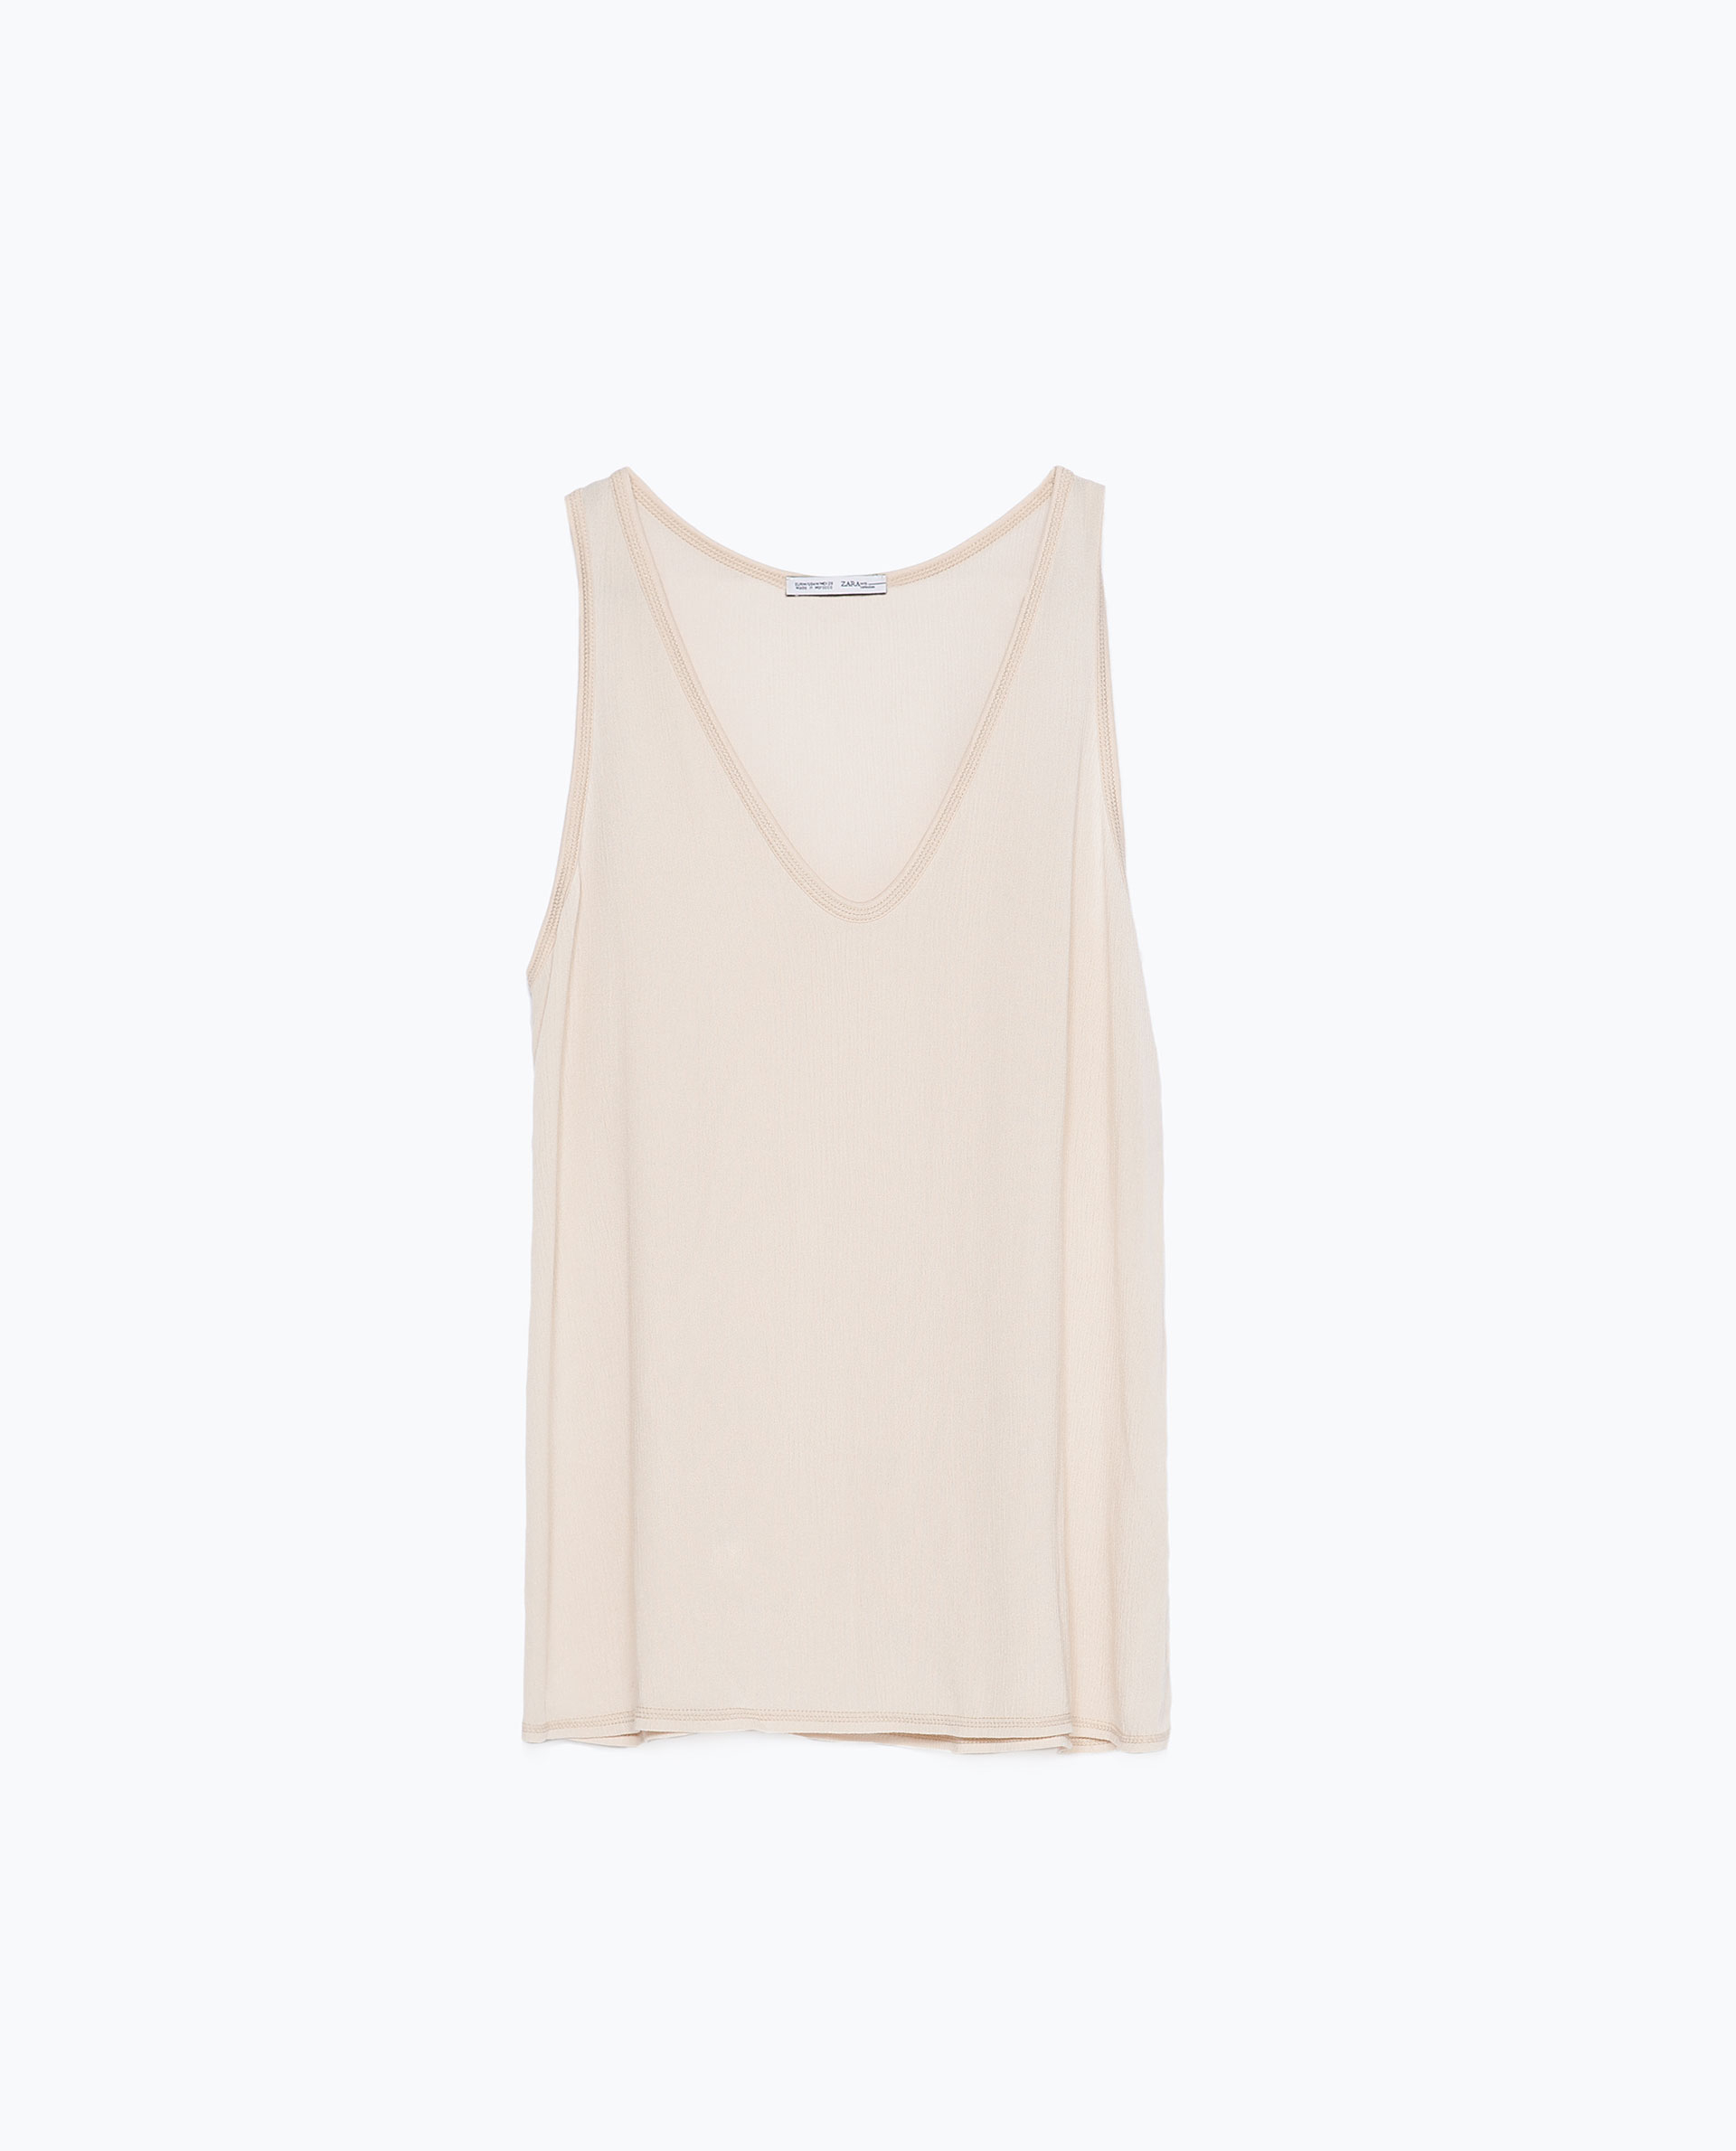 Zara Wrinkled Fabric T-Shirt in Beige (Natural) | Lyst